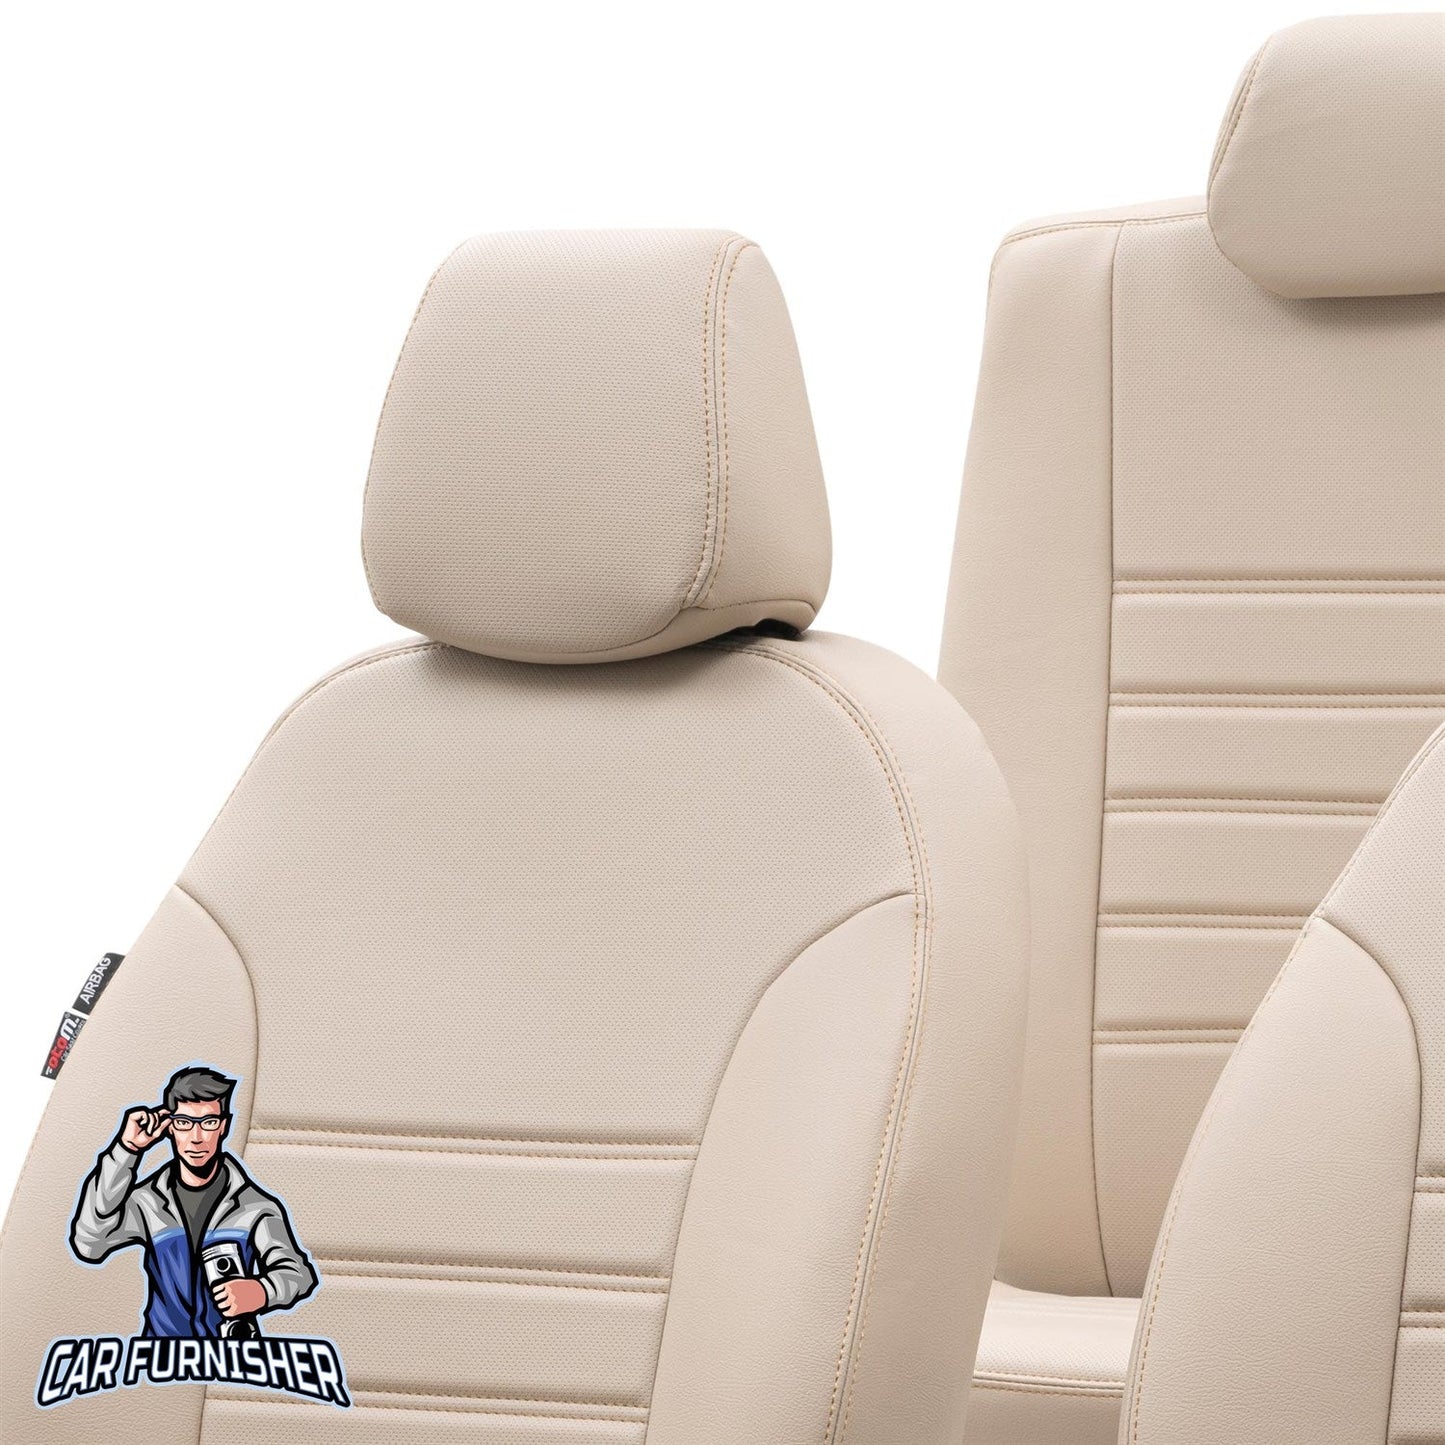 Nissan Pulsar Seat Covers Istanbul Leather Design Beige Leather